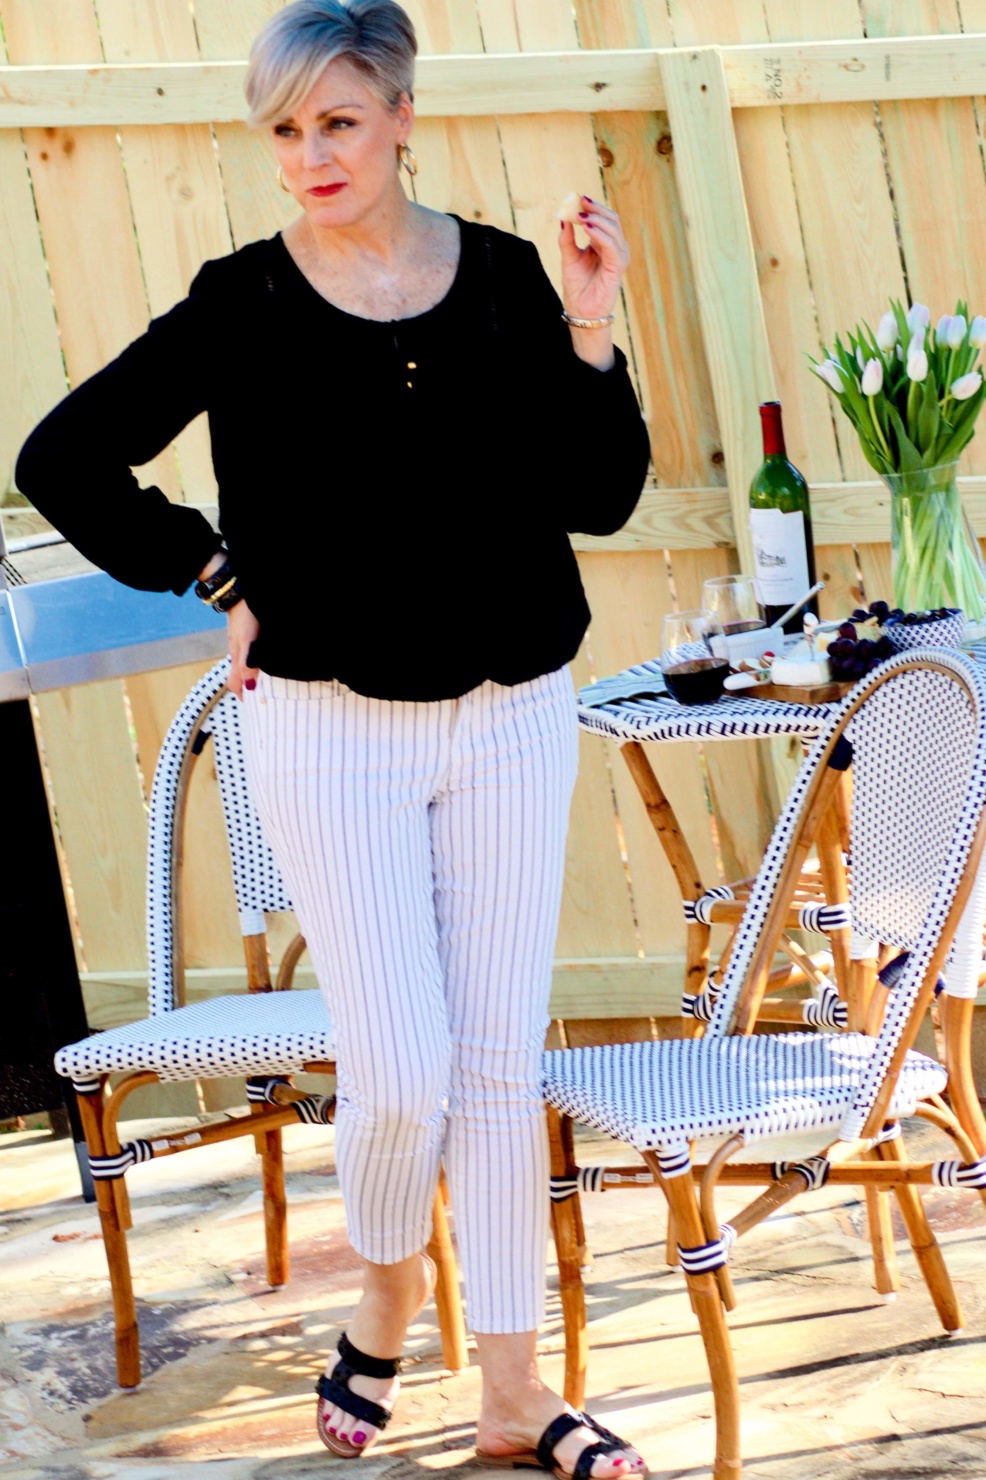 beth from Style at a Certain Age wears clothes from Walmart.com, Sofia peasant blouse and striped jeans